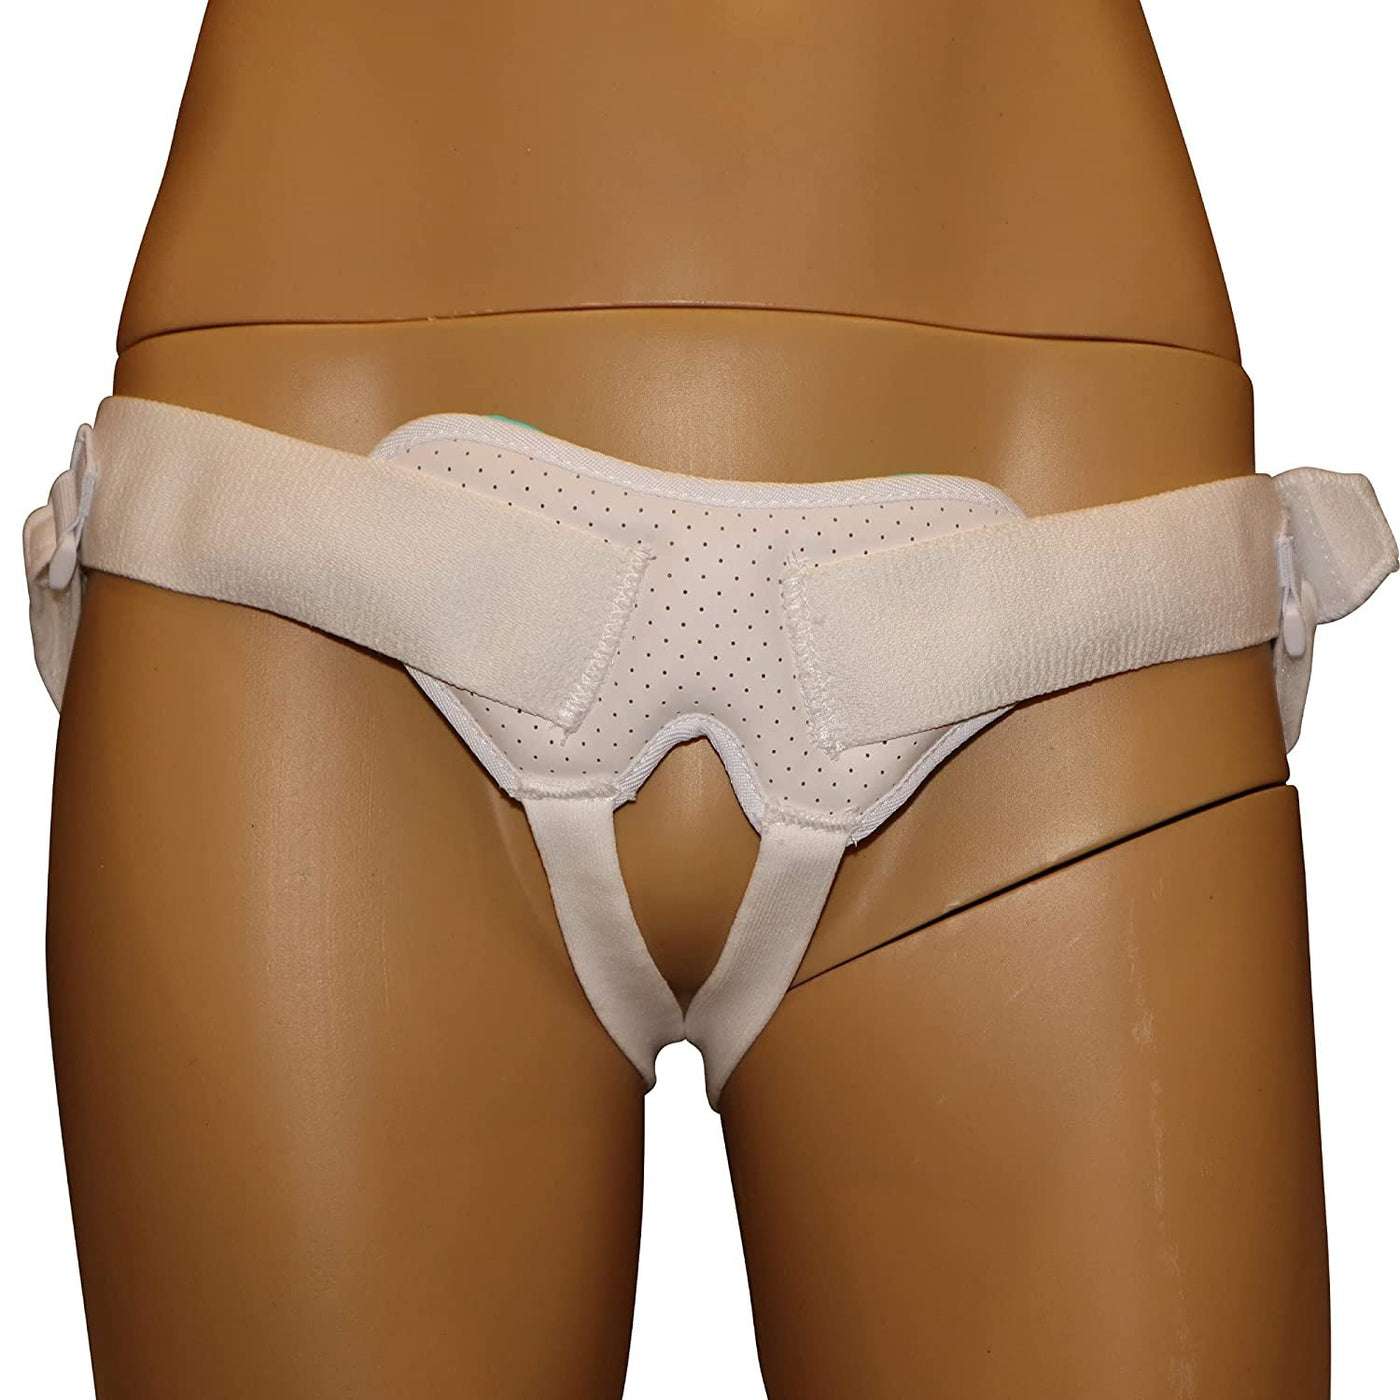 Hernia Support Belt Double Inguinal-Groin Truss Brace With Pad For